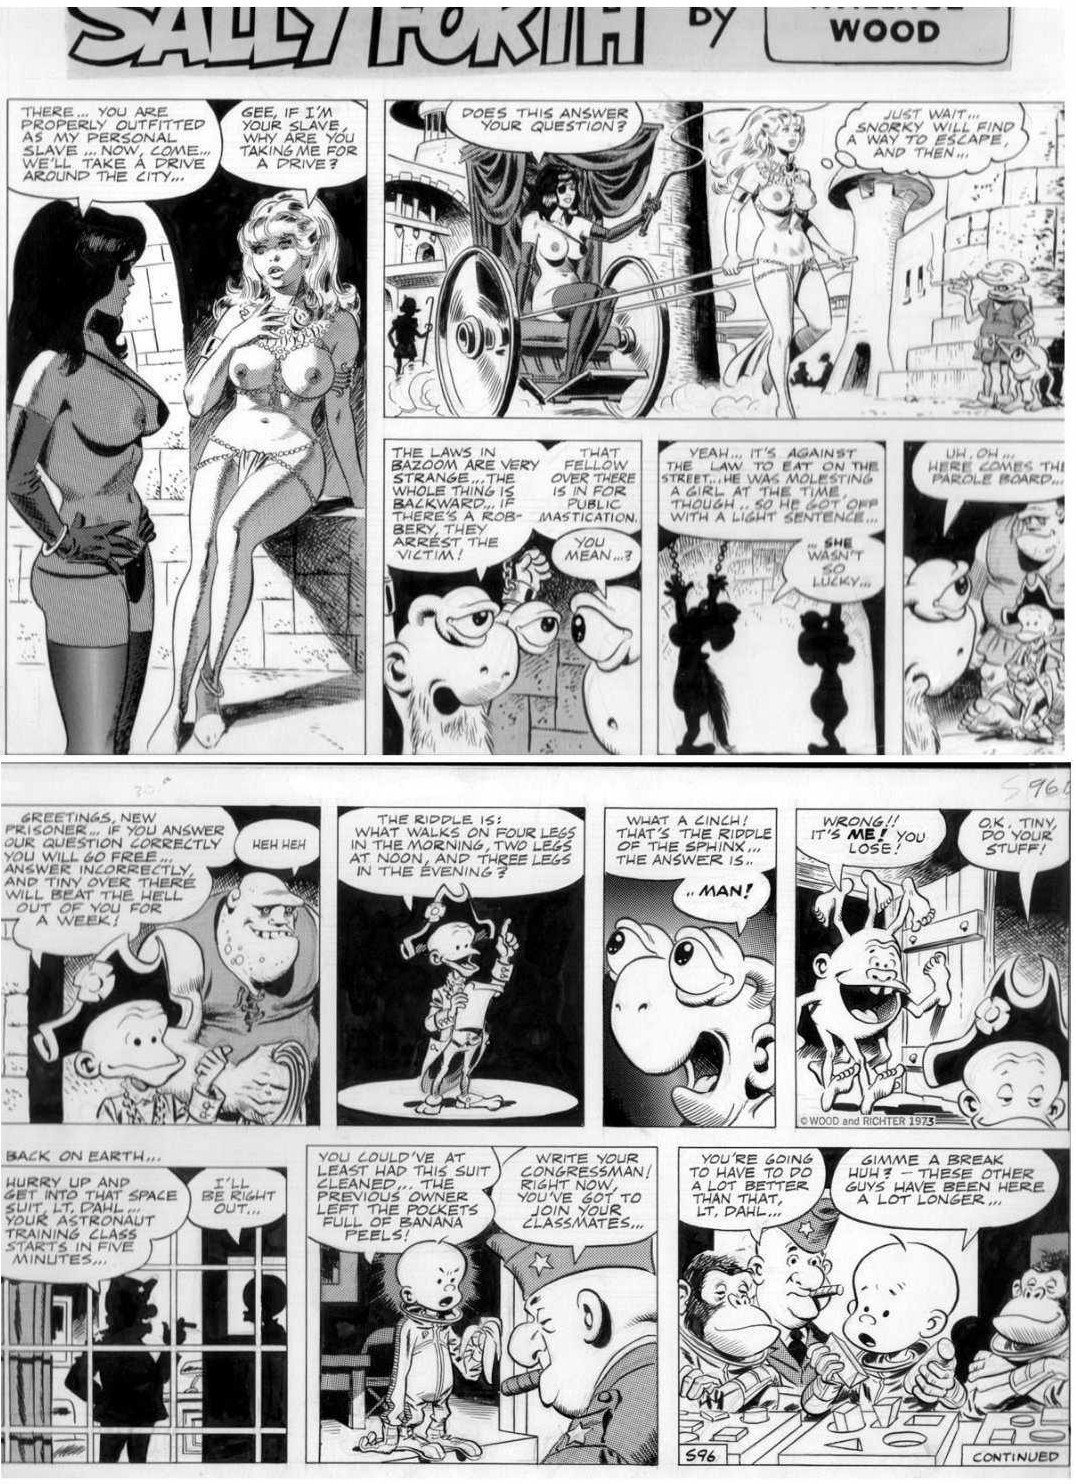 Hot Cartoon Porn Sally Forth - WOOD, WALLY - Sally Forth Sunday #96 - Boobarella makes Sally her slave, in  Stephen Donnelly's WOOD, WALLY - Marvel, Daredevil; DC; Thunder Agents  pages, Sally Forth, Cannon; Galaxy Magazine Comic Art Gallery Room